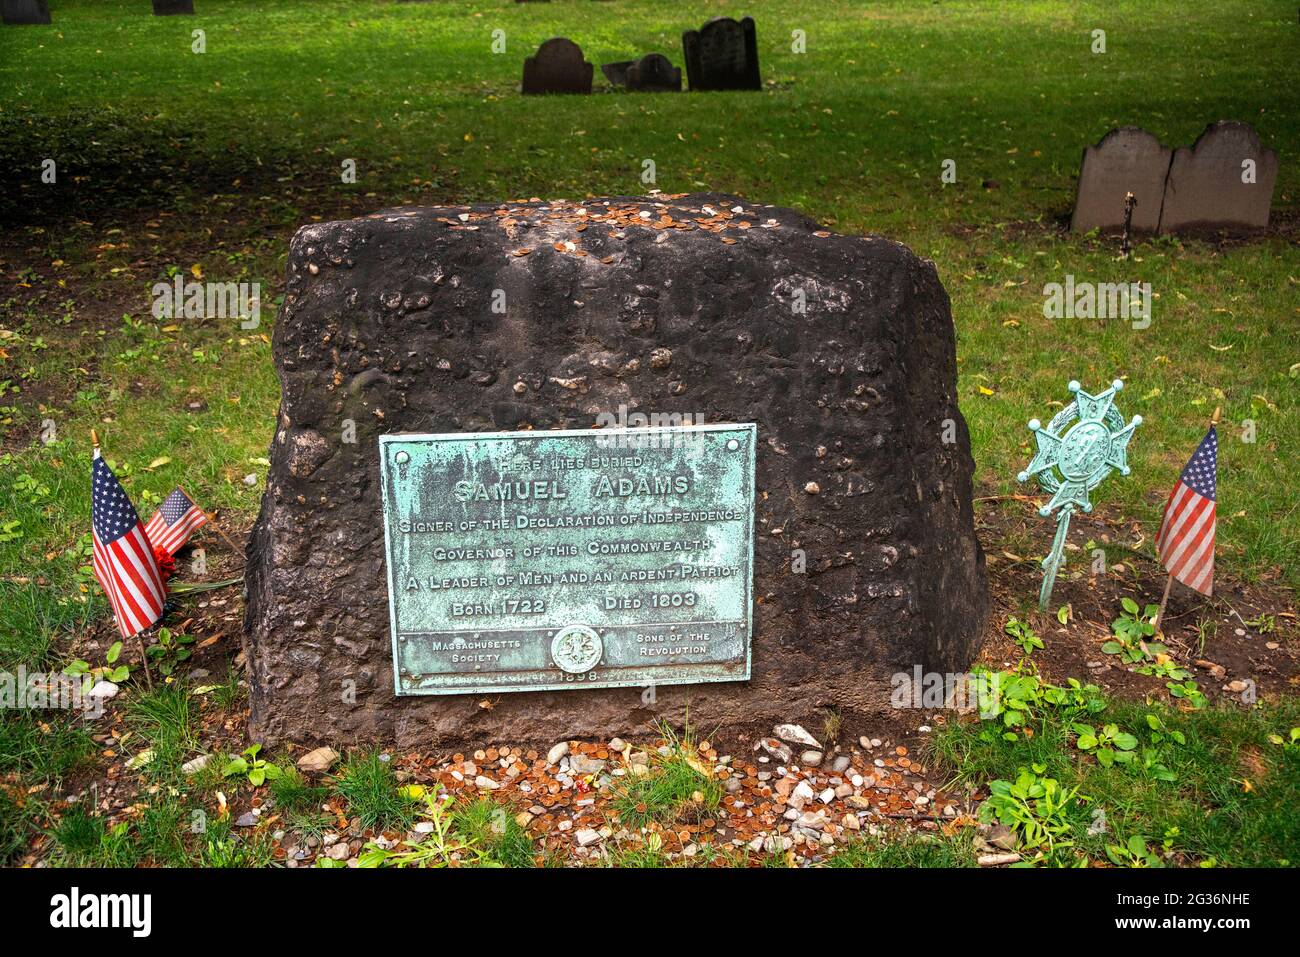 Burial site of Samuel Adams and tombstones in the historic King's Chapel cemetery Burying Ground, Tremont Street, Boston, Massachusetts, United States Stock Photo